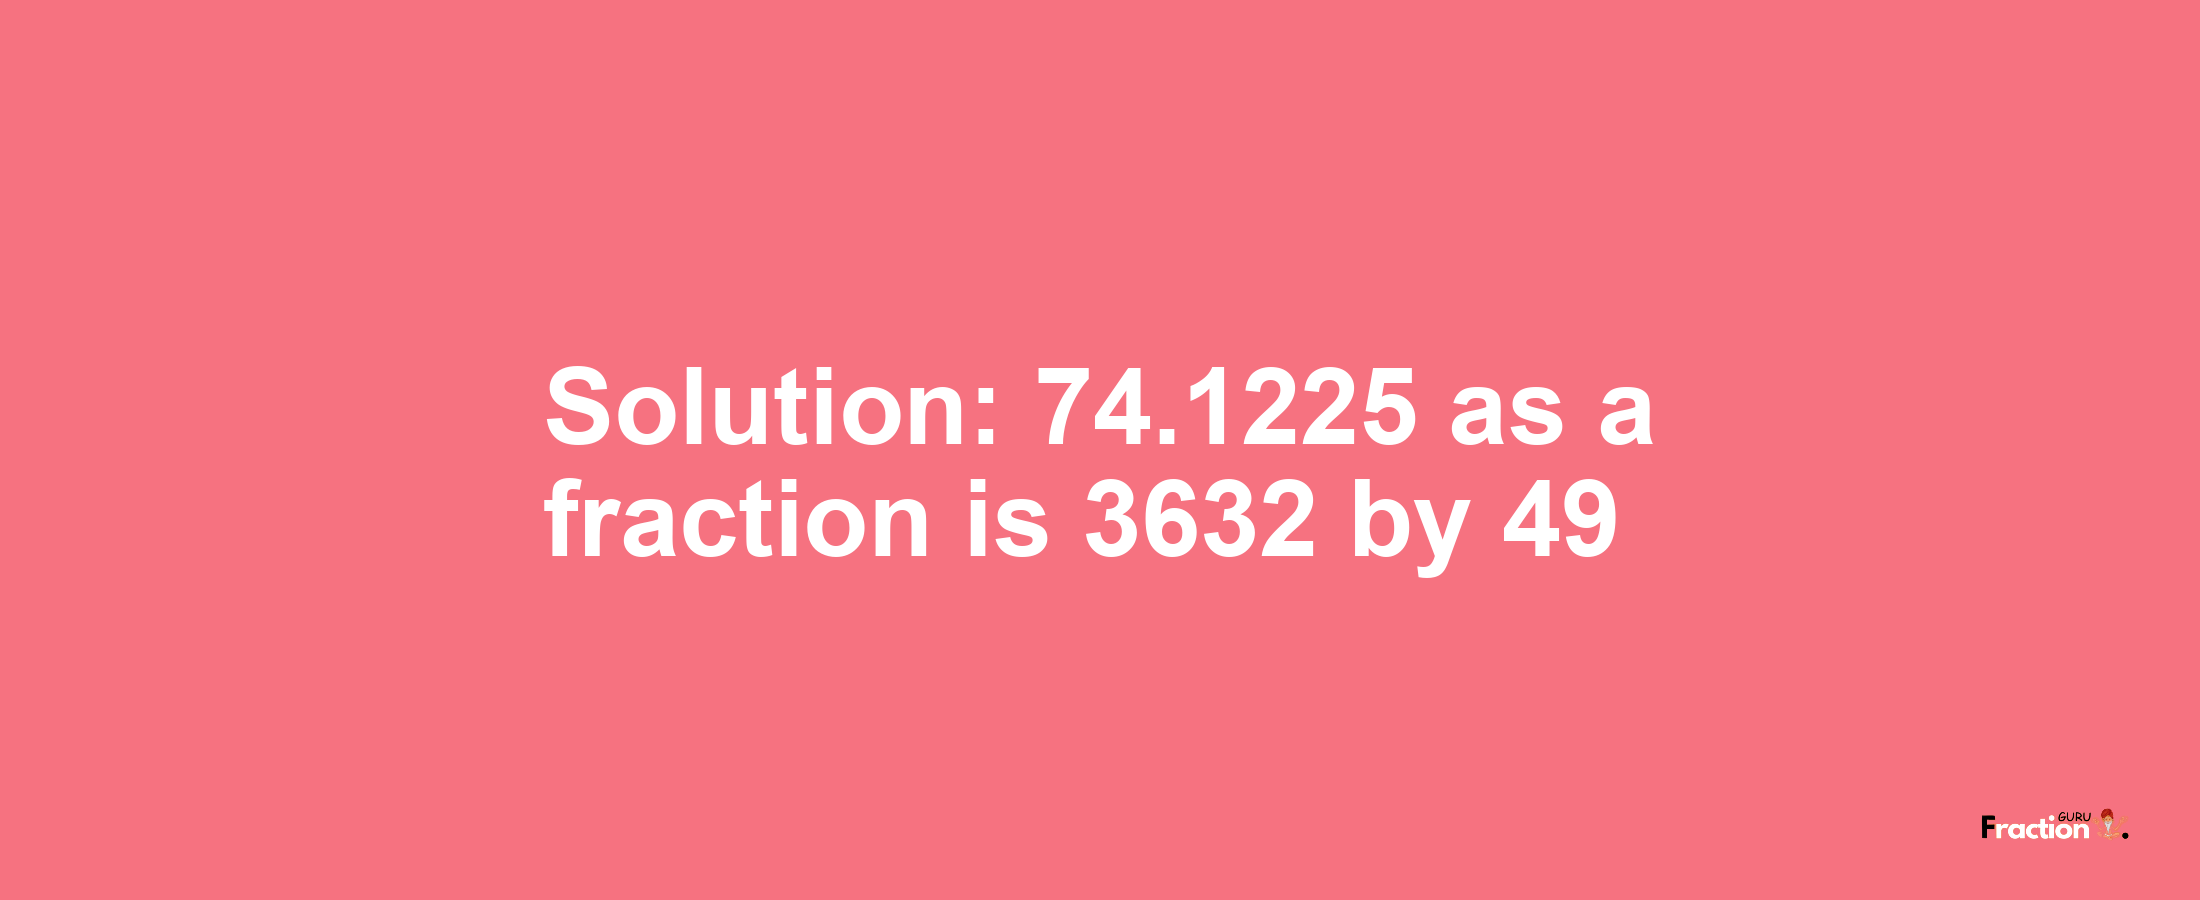 Solution:74.1225 as a fraction is 3632/49